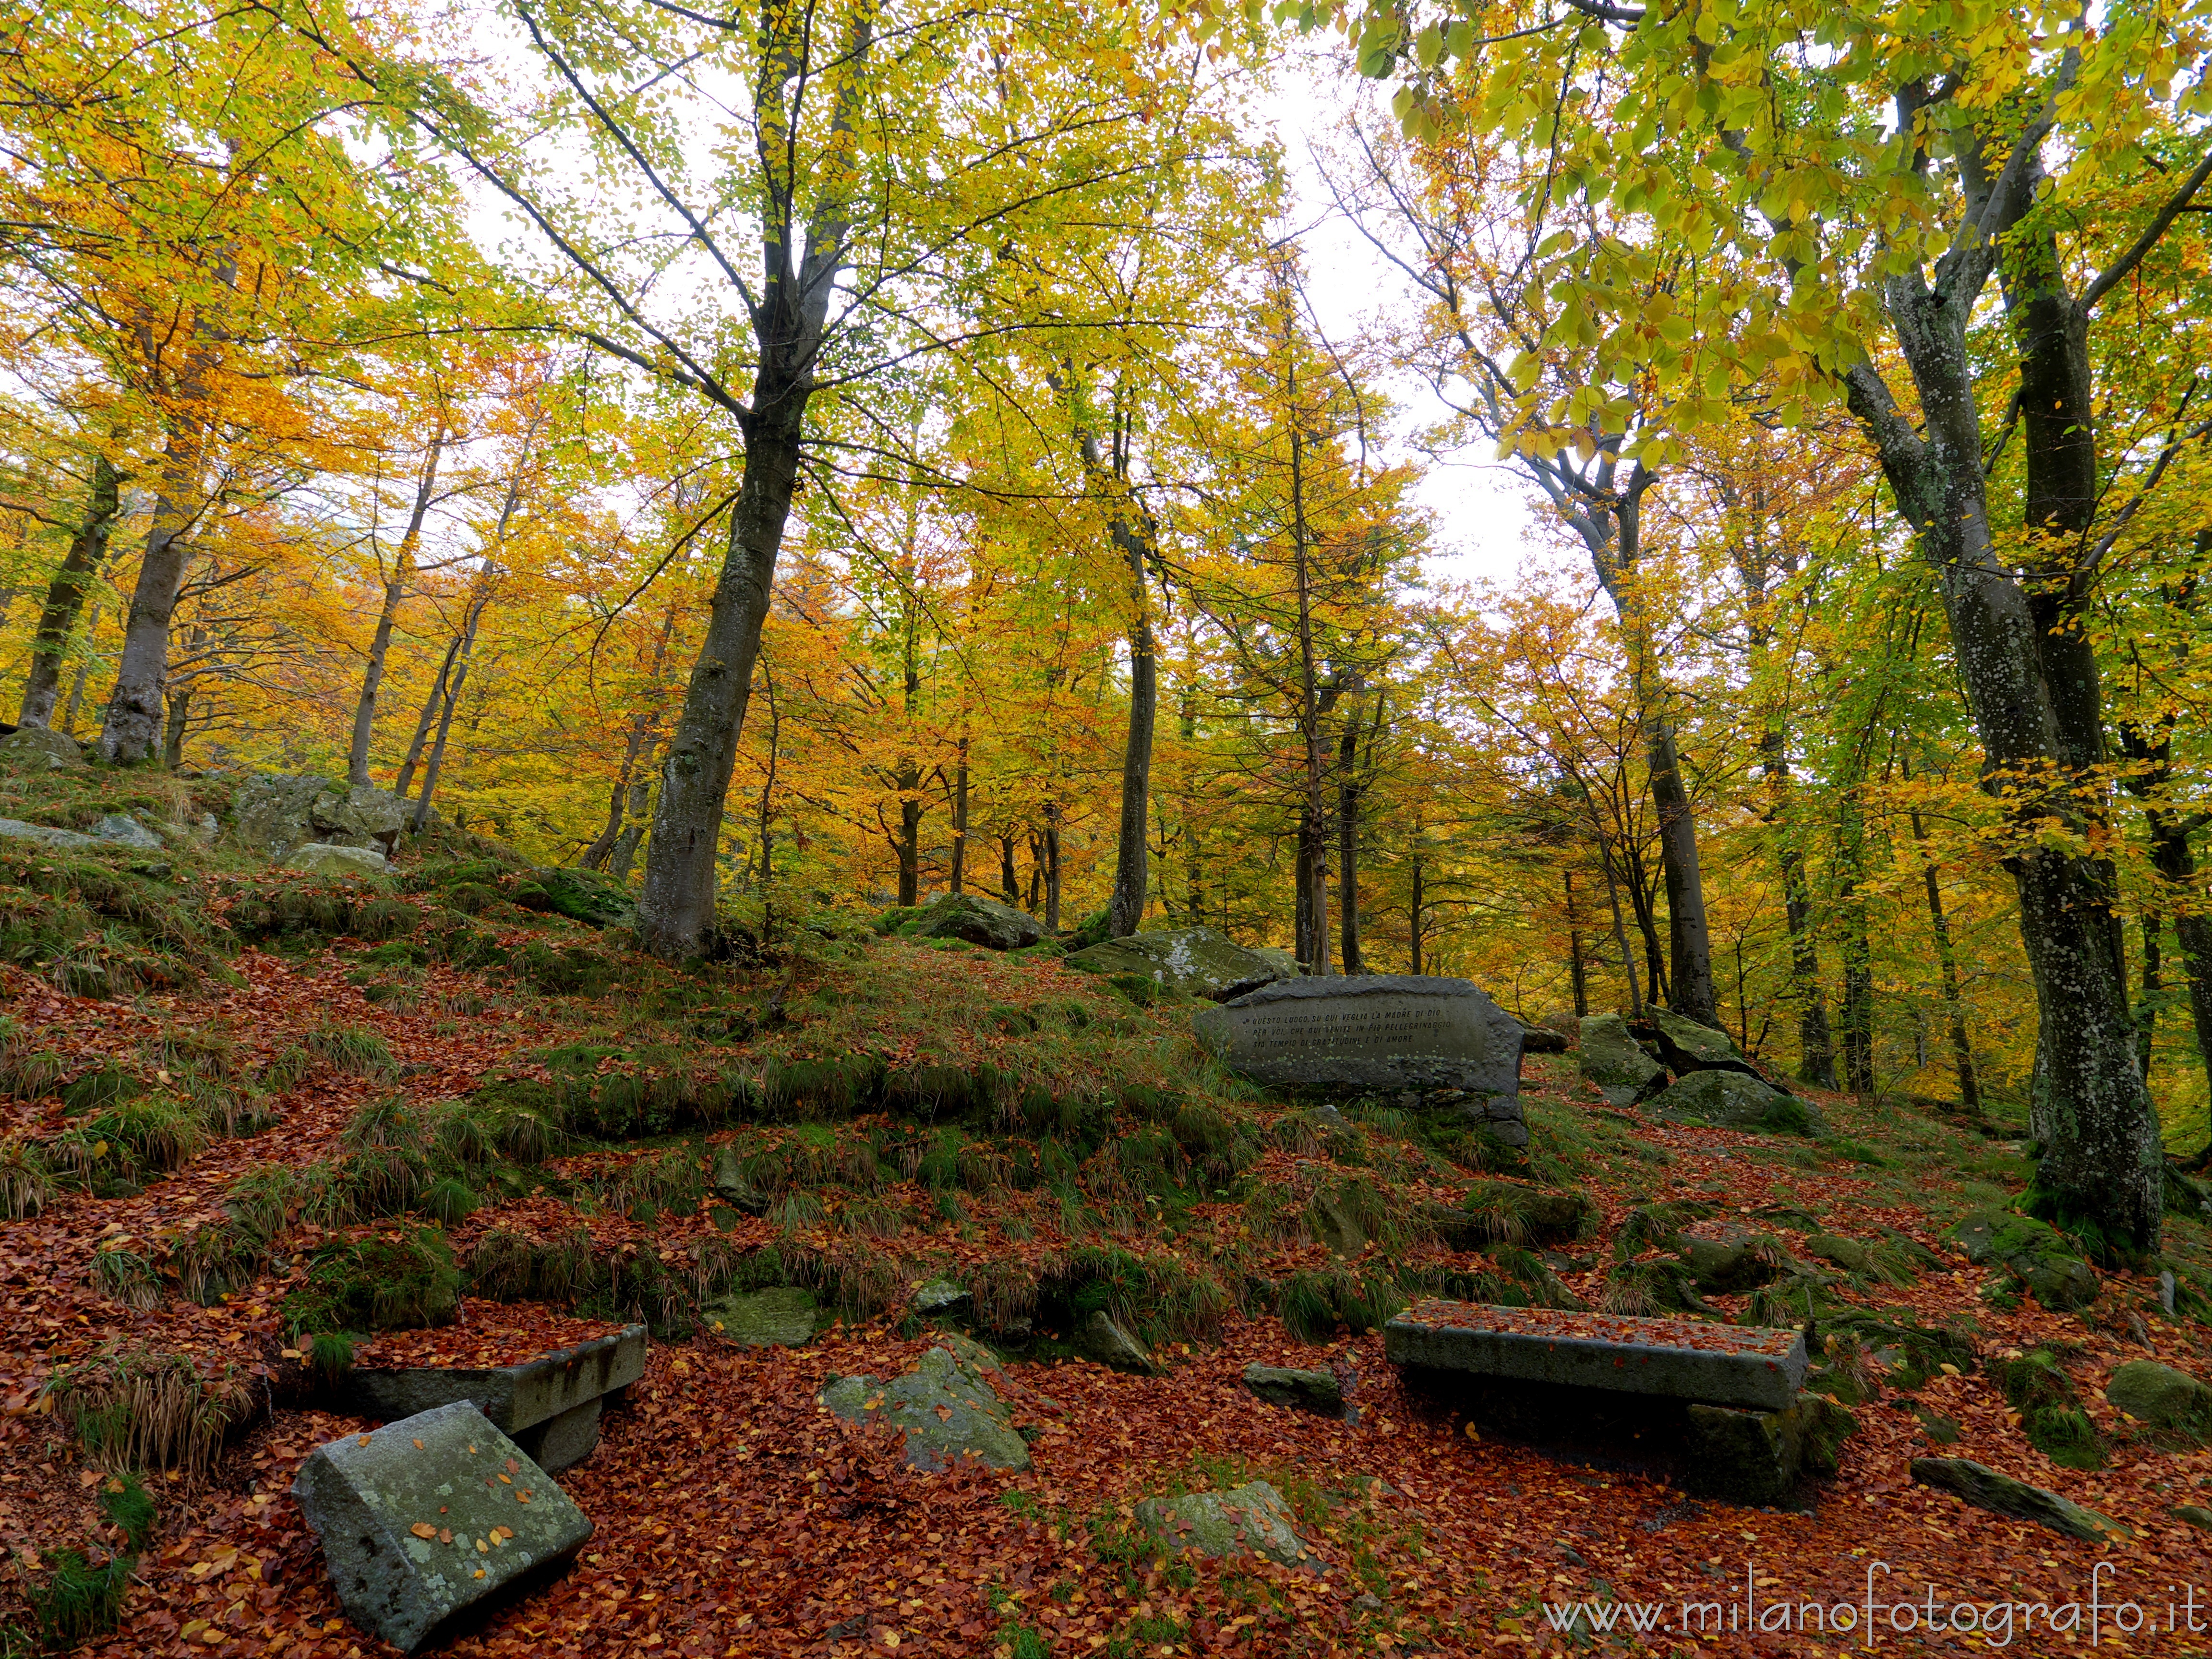 Biella, Italy: Stones covered with moss in the autumn woods around the Sanctuary of Oropa - Biella, Italy